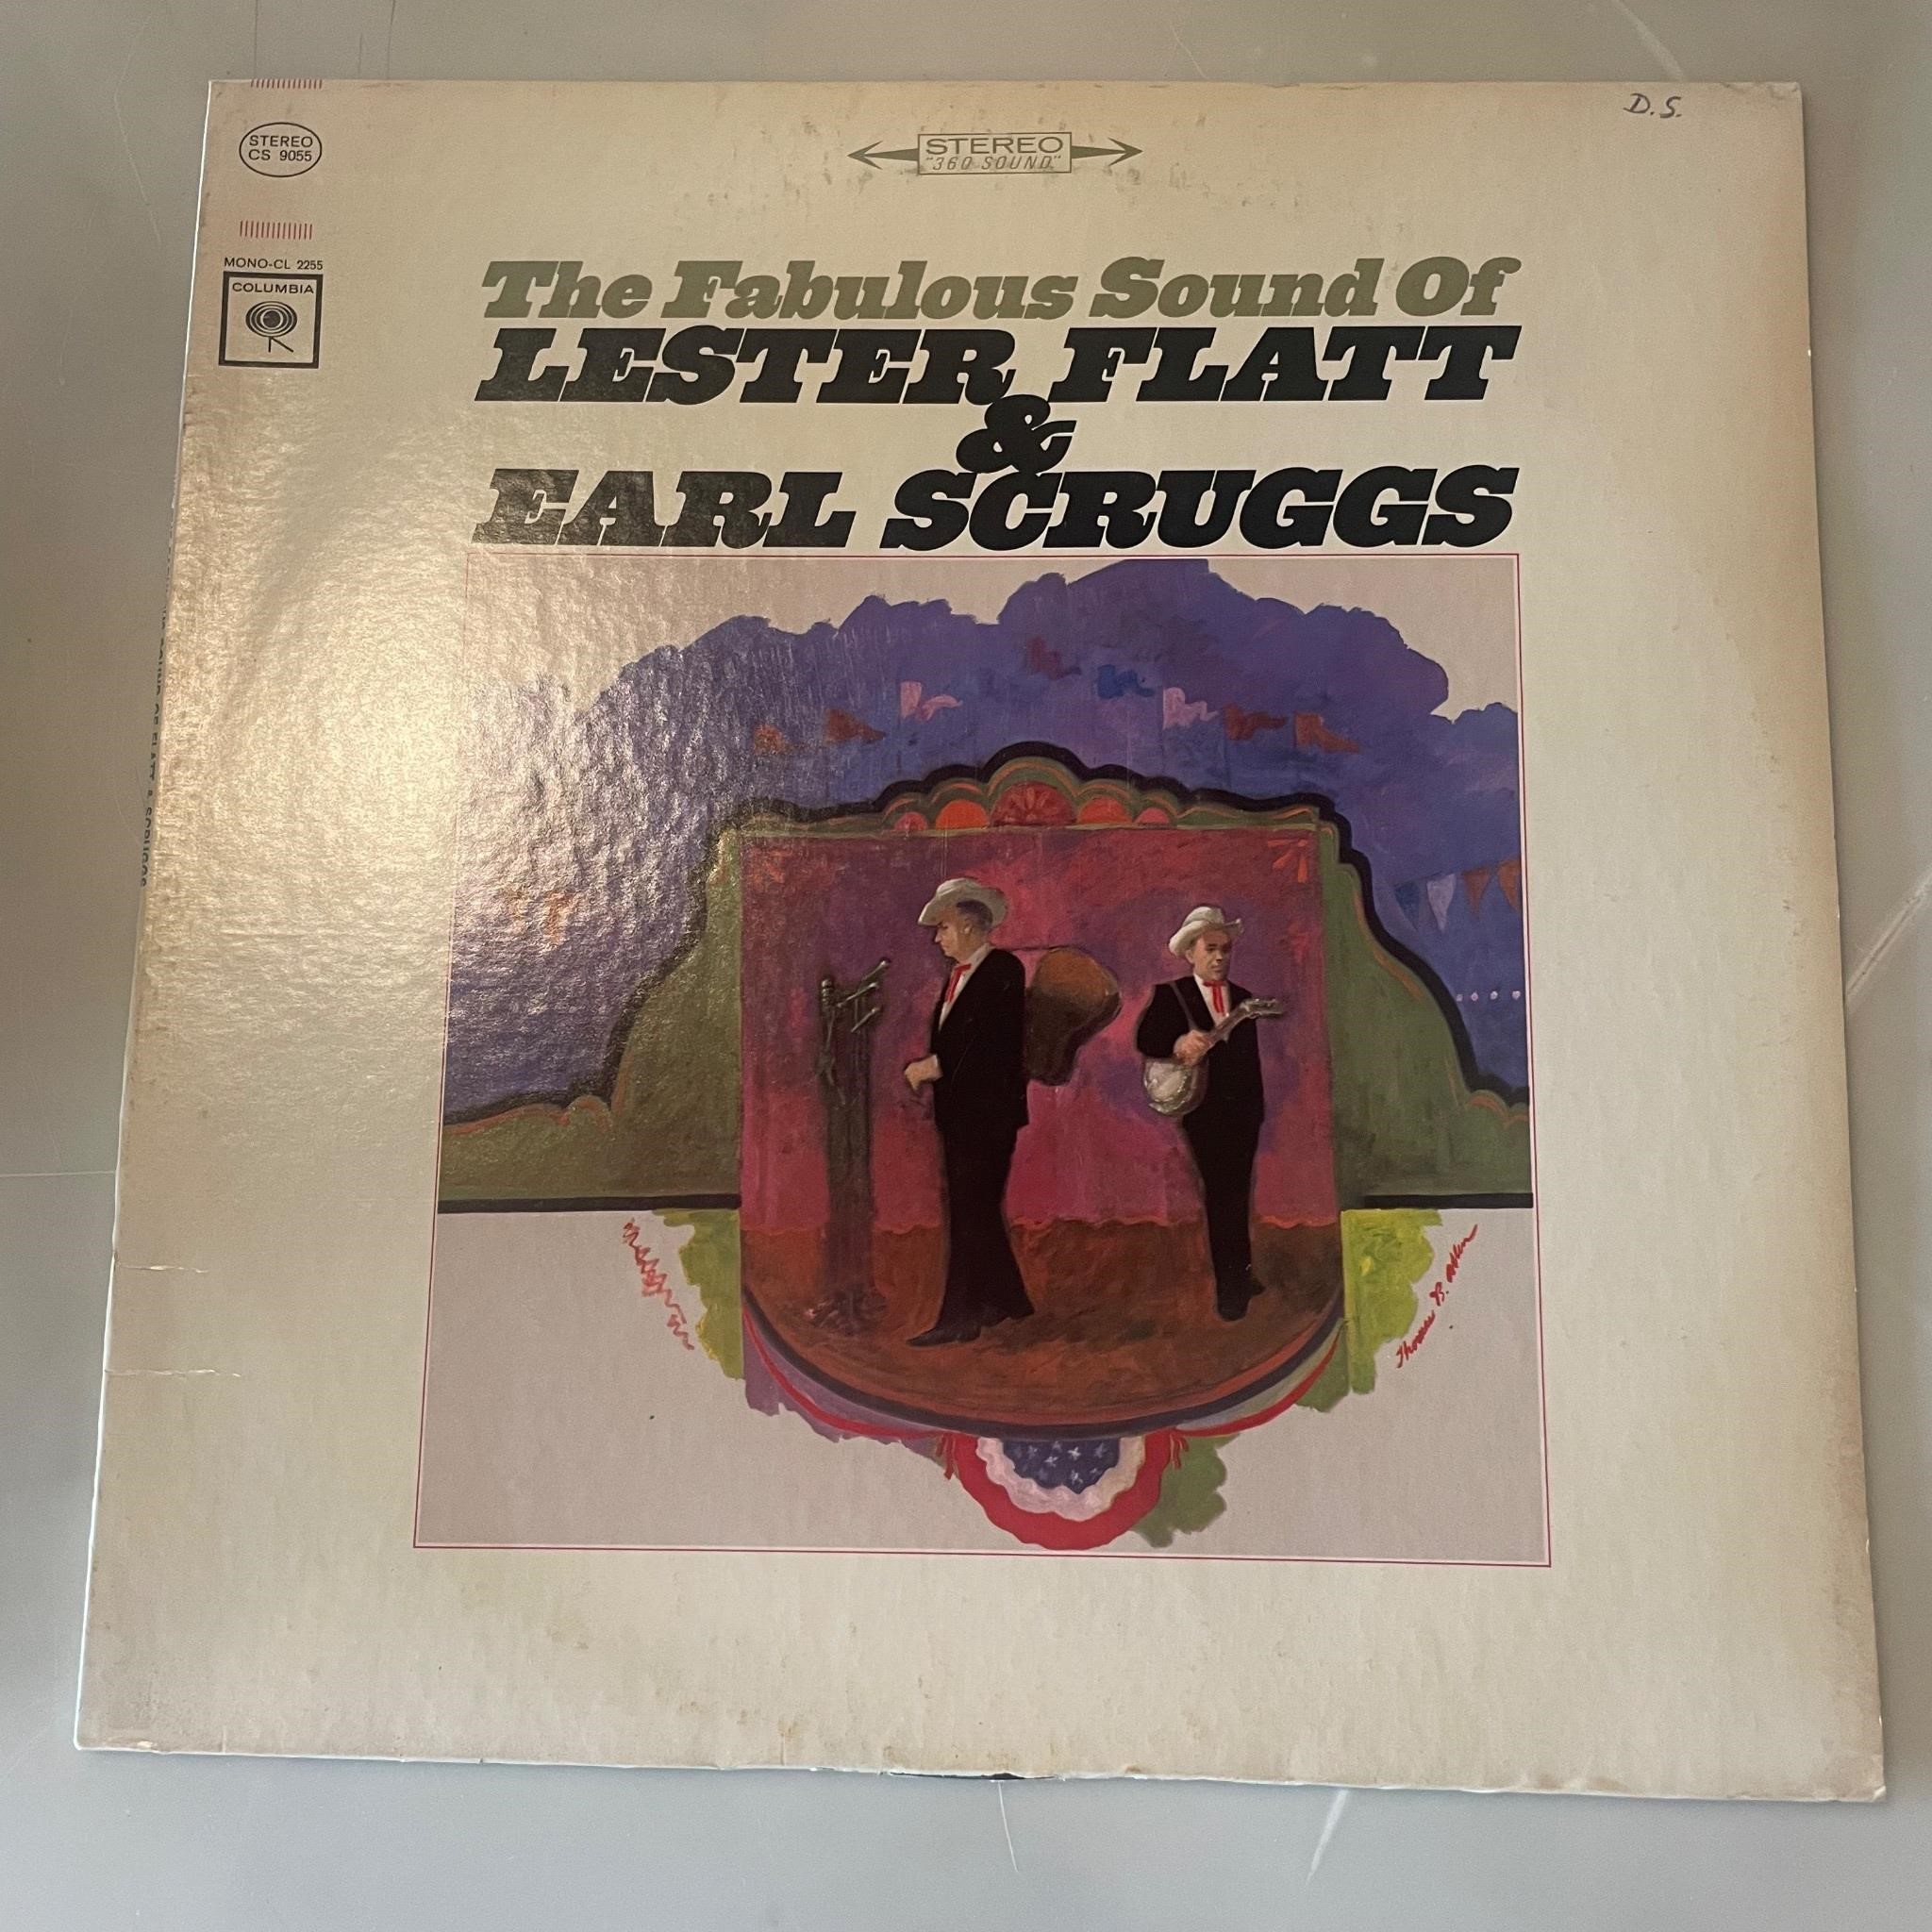 VINYL RECORD June Auction UNLIMITED $12 FLAT RATE SHIP